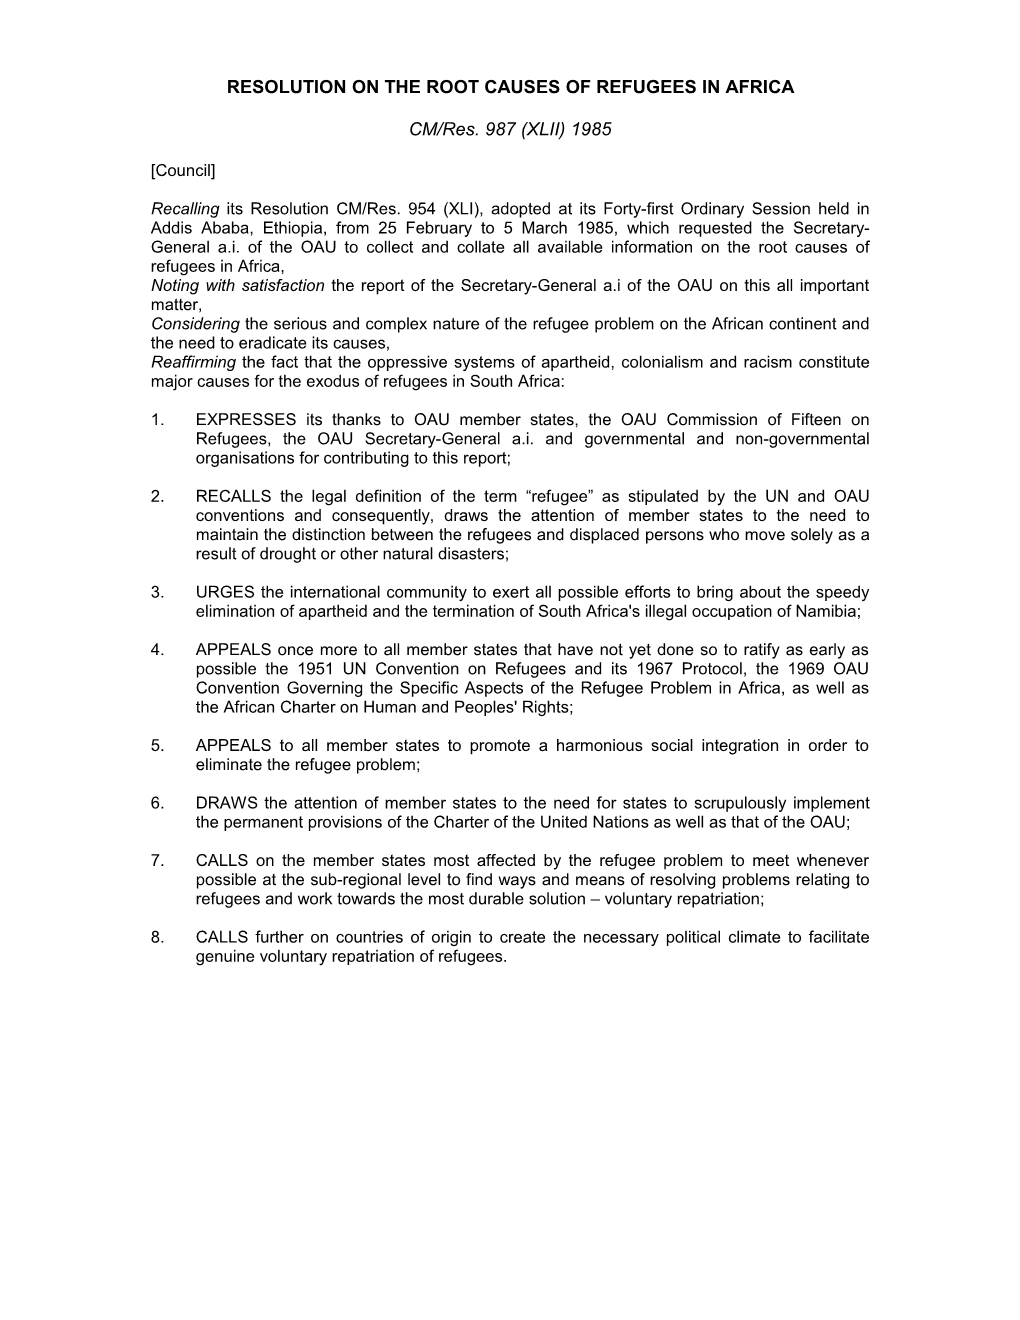 Resolution on the Root Causes of Refugees in Africa